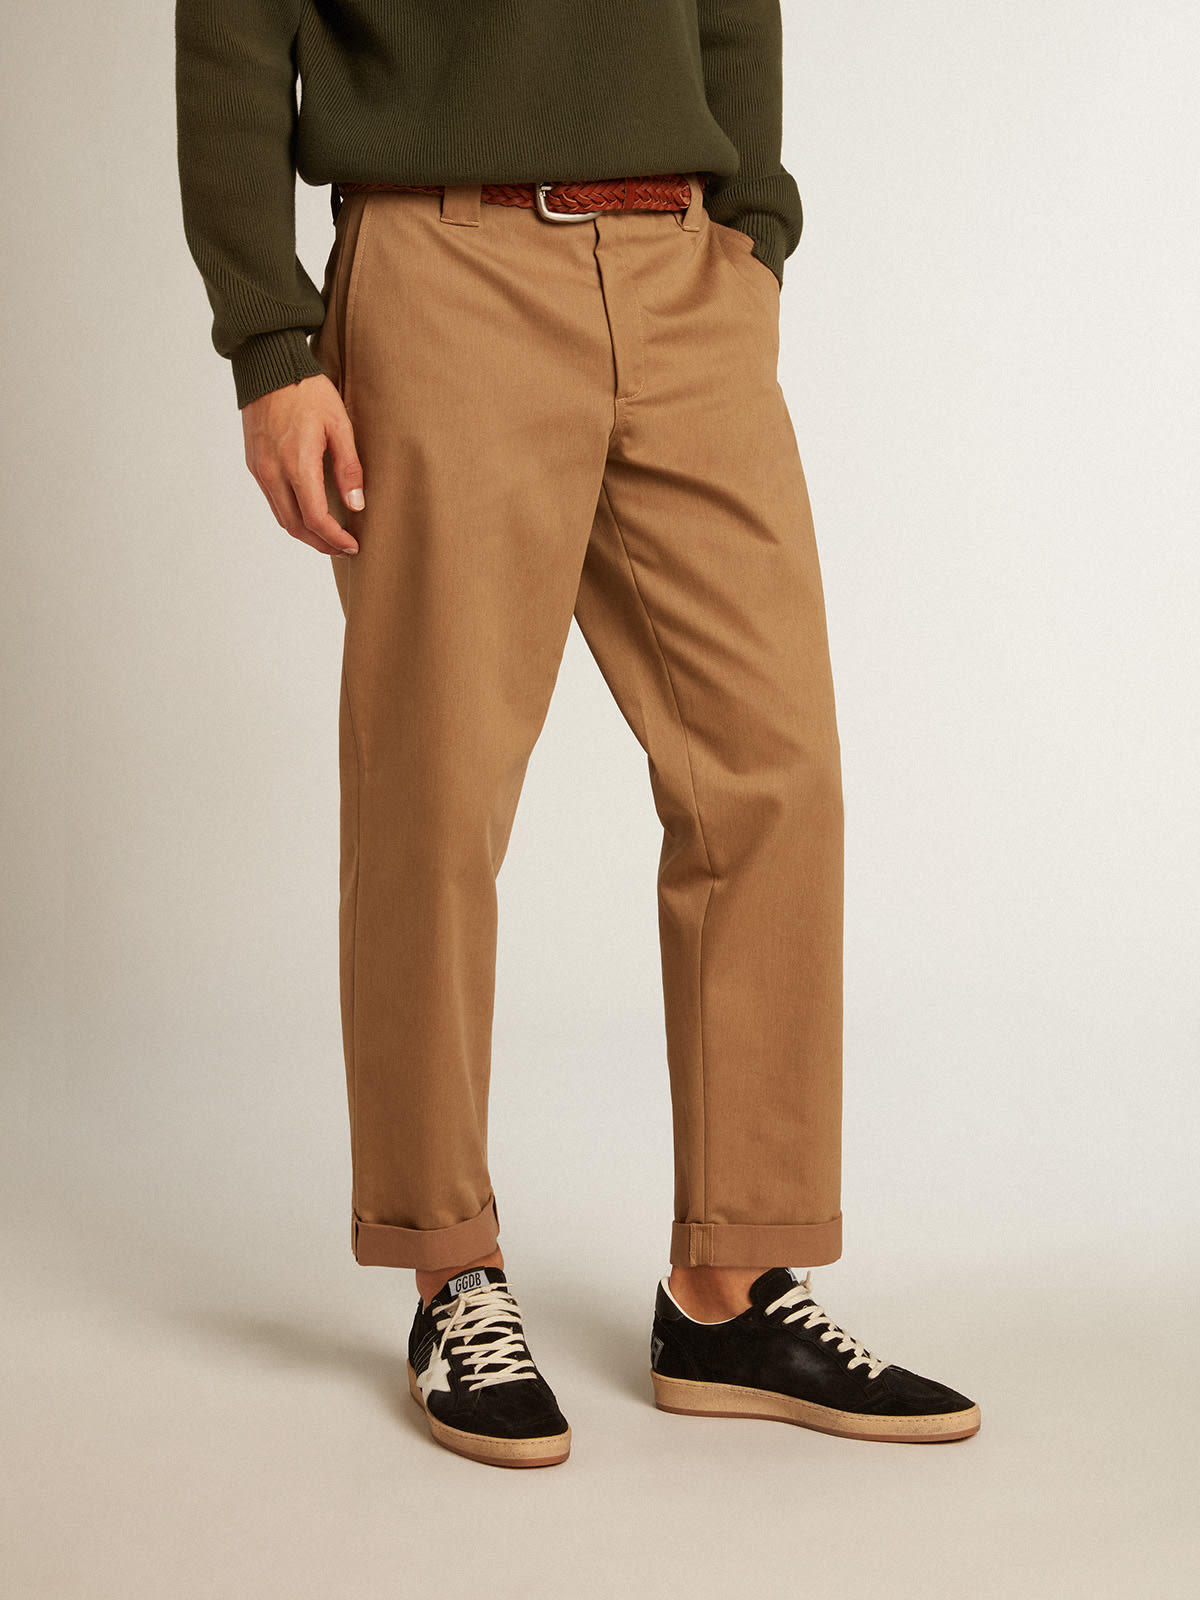 Golden Goose - Pantalone chino Golden Collection color khaki beige in 